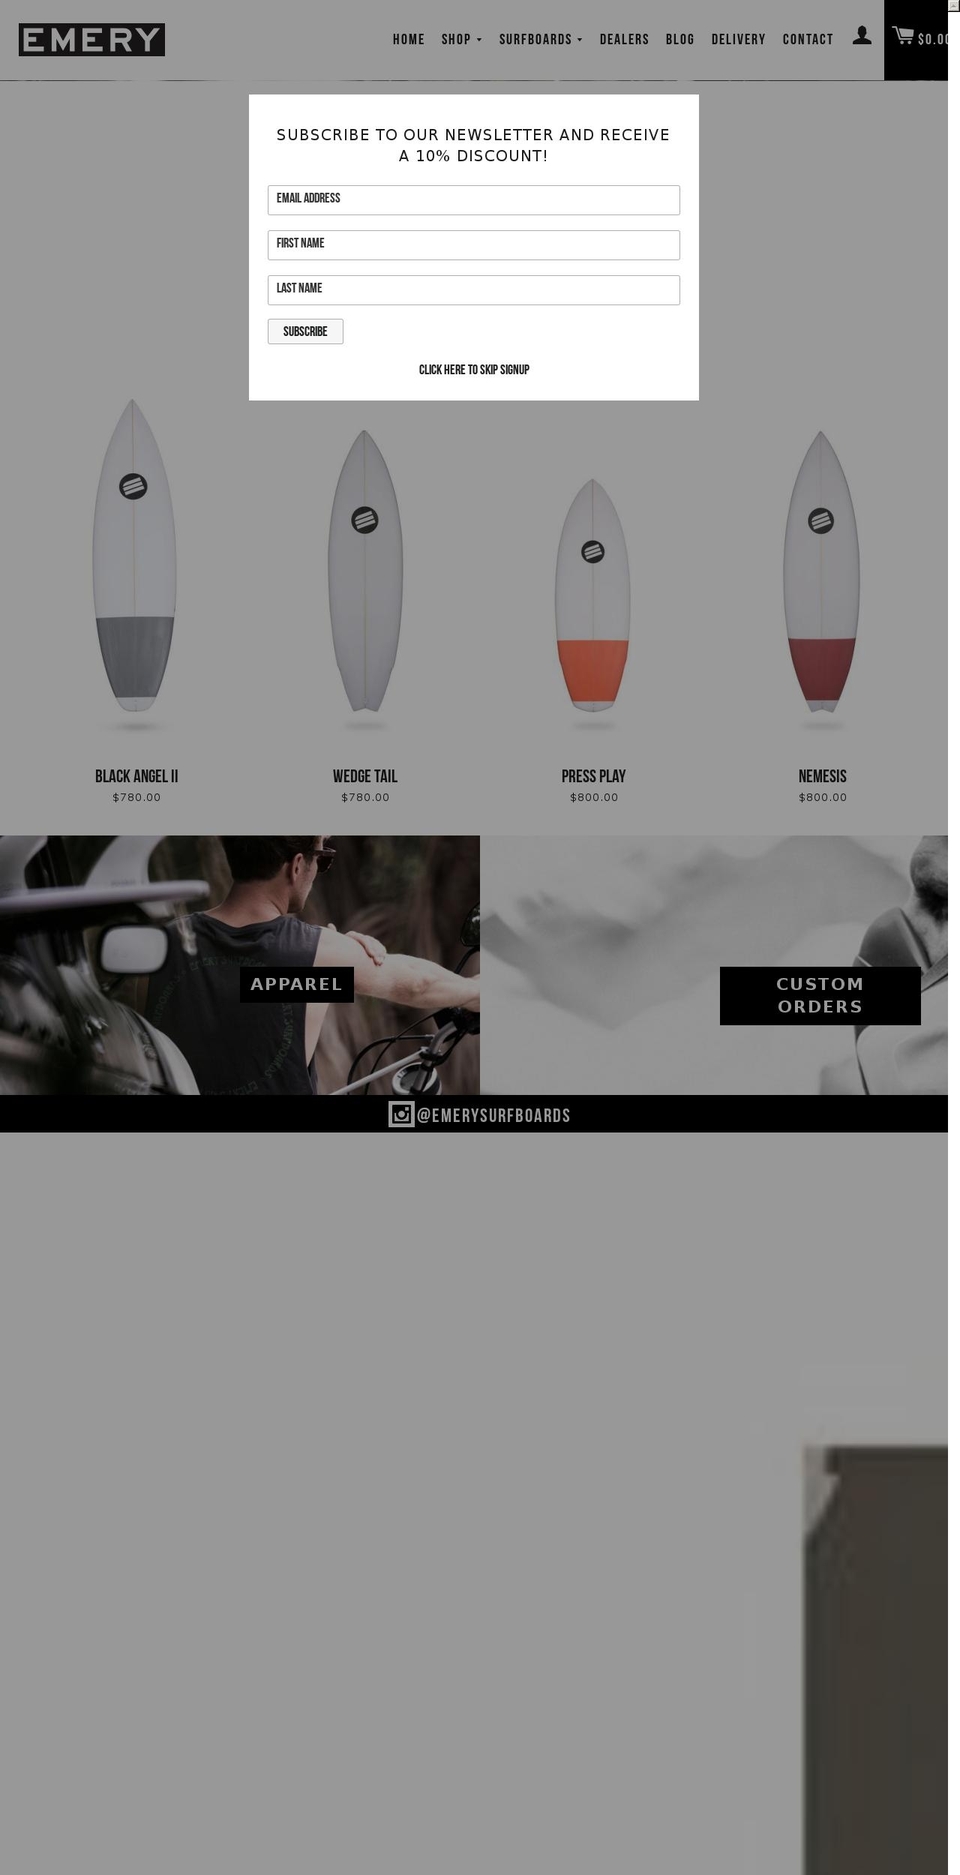 Clean Shopify theme site example emerysurfboards.com